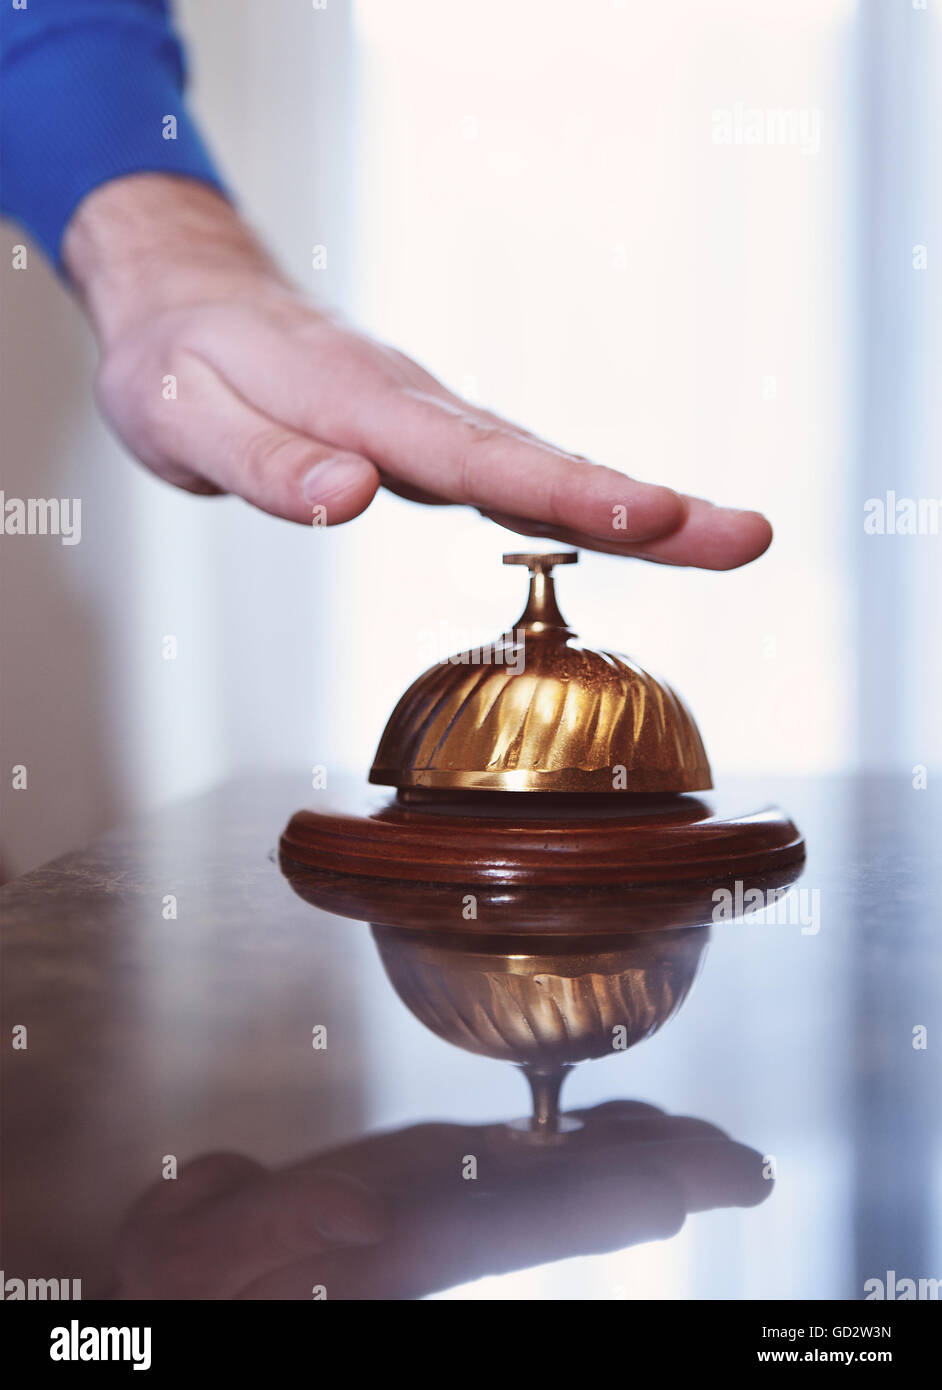 Hand of a man using a hotel bell in retro style Stock Photo